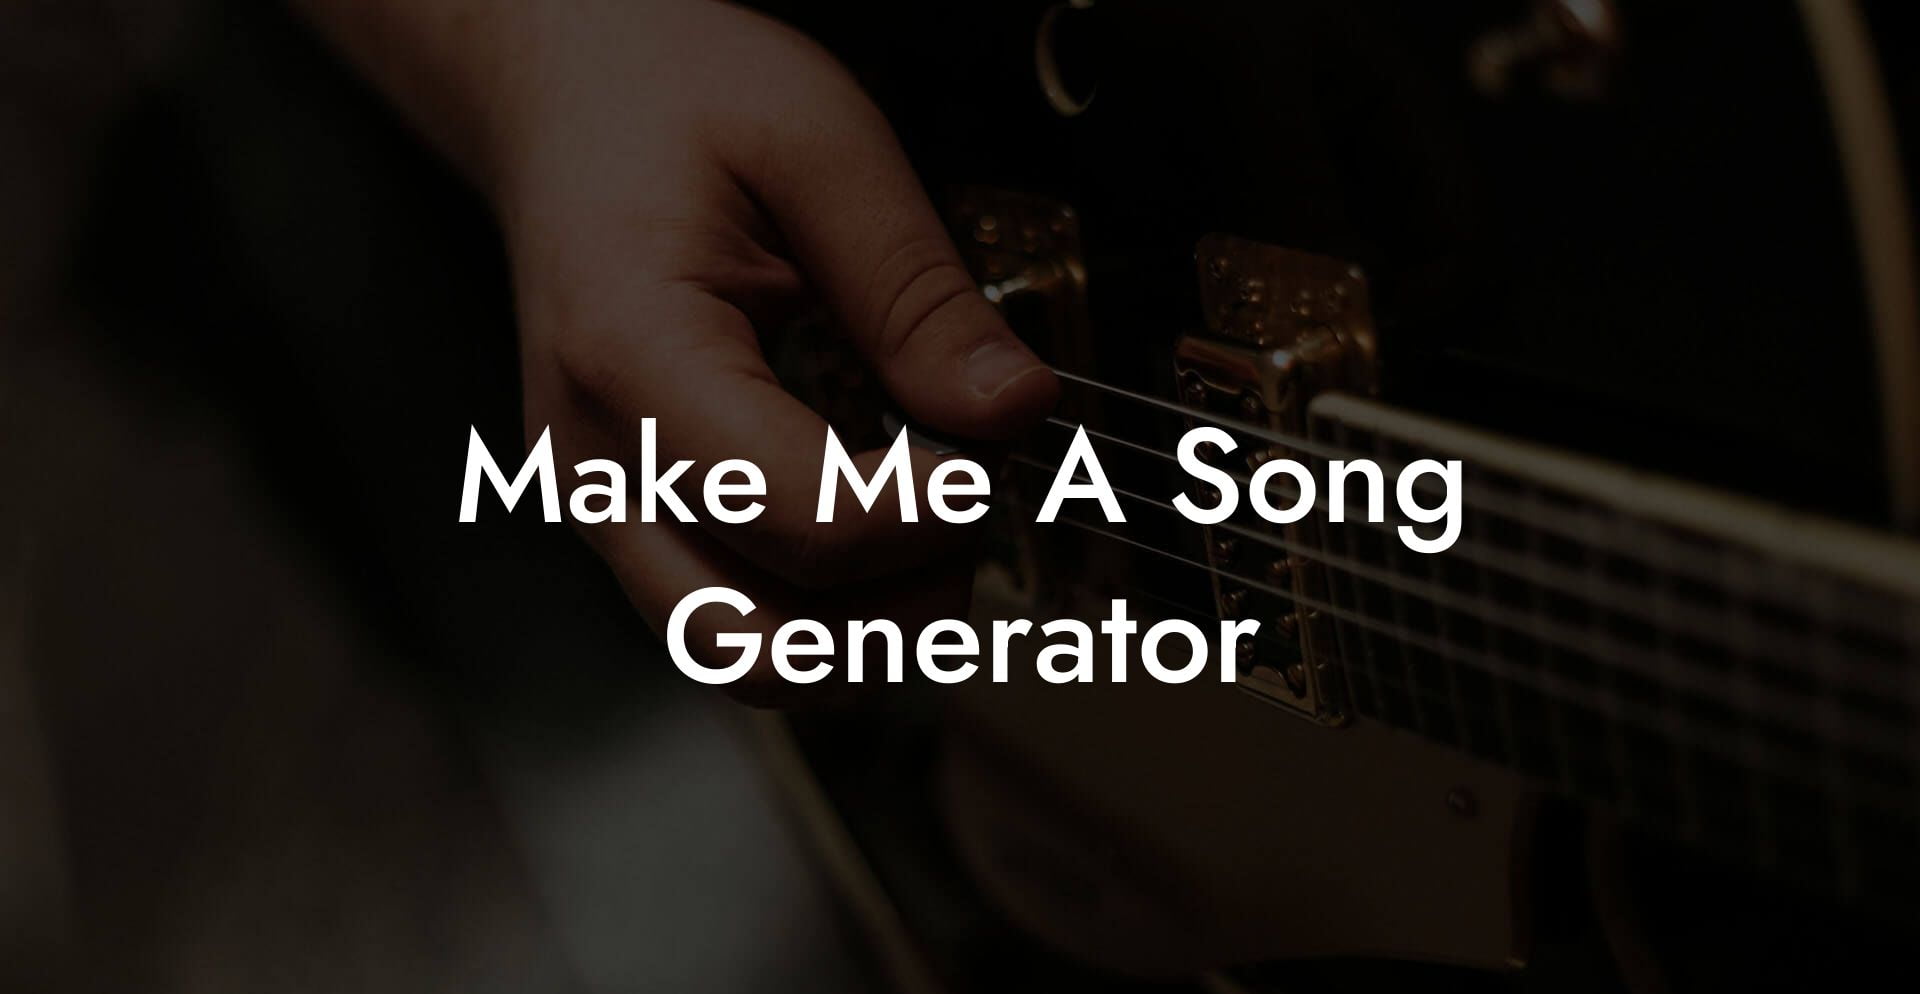 make me a song generator lyric assistant